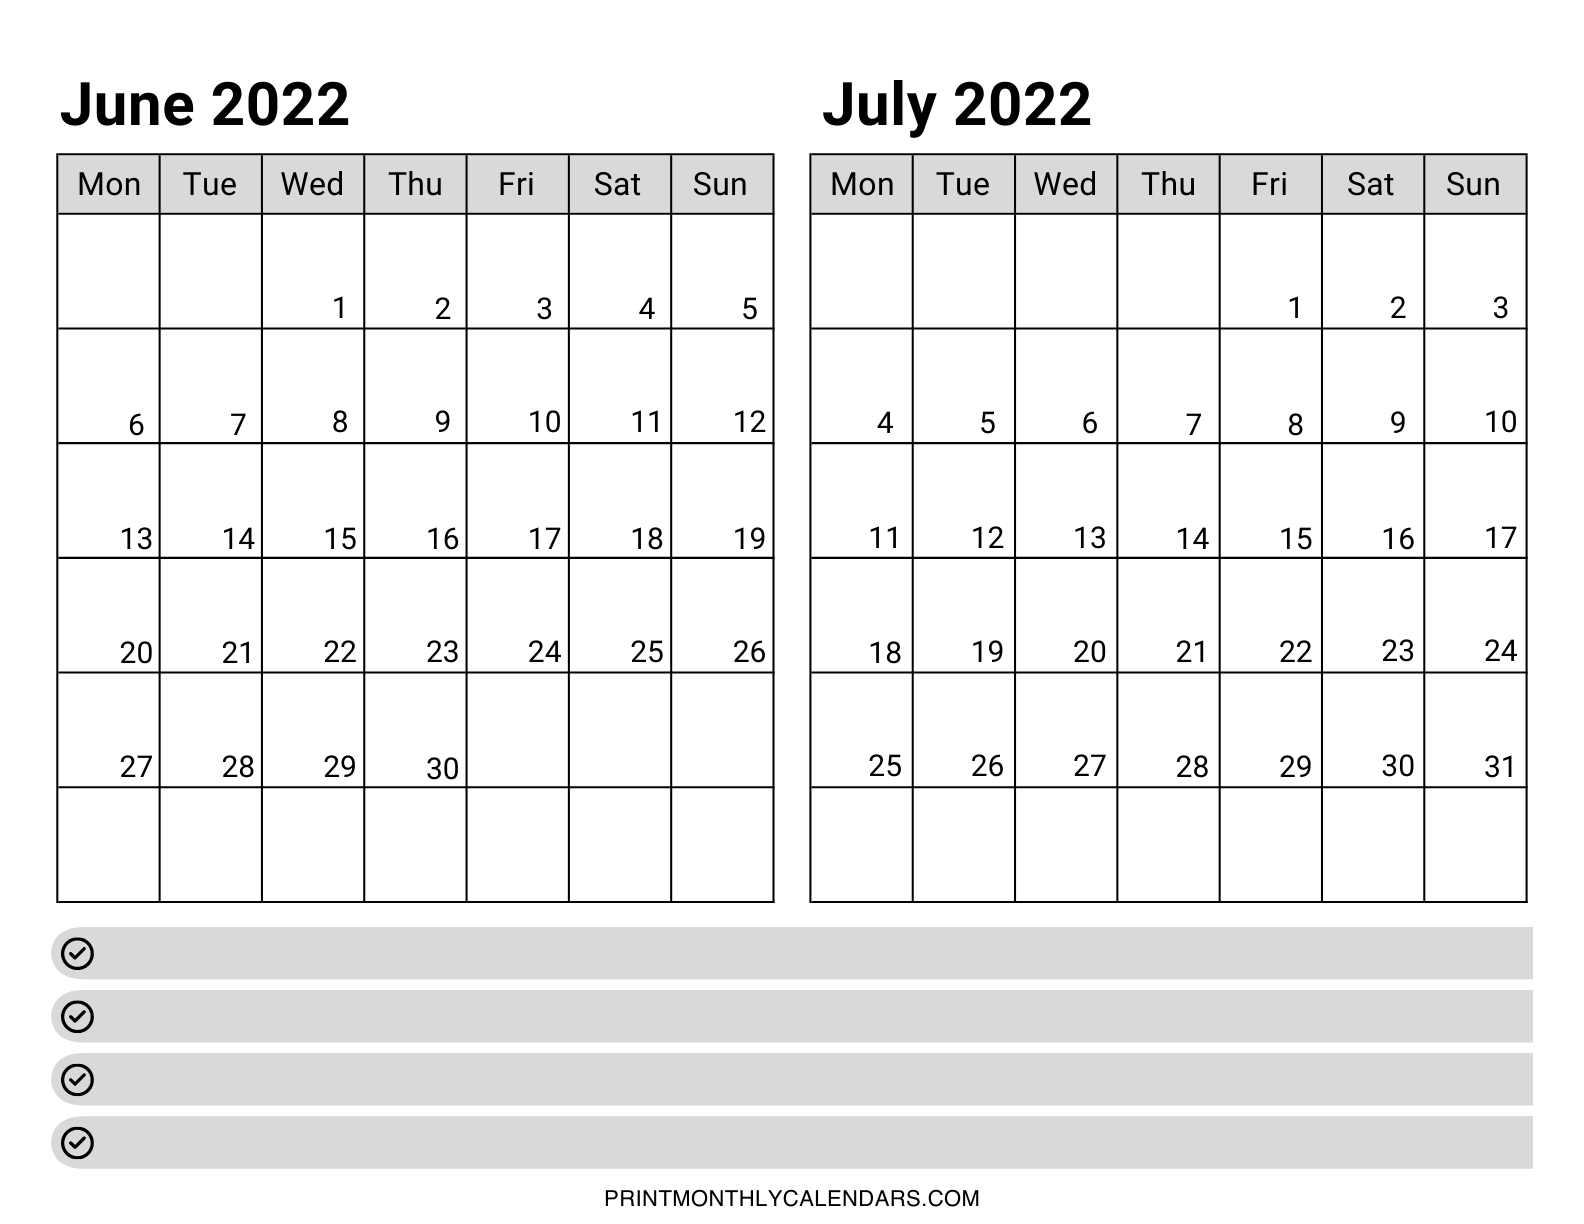 On one page, in a horizontal layout, a two-month June and July 2022 calendar template is designed. A blank notes box is provided at the bottom of the page for writing important days, dates, schedules, and events.